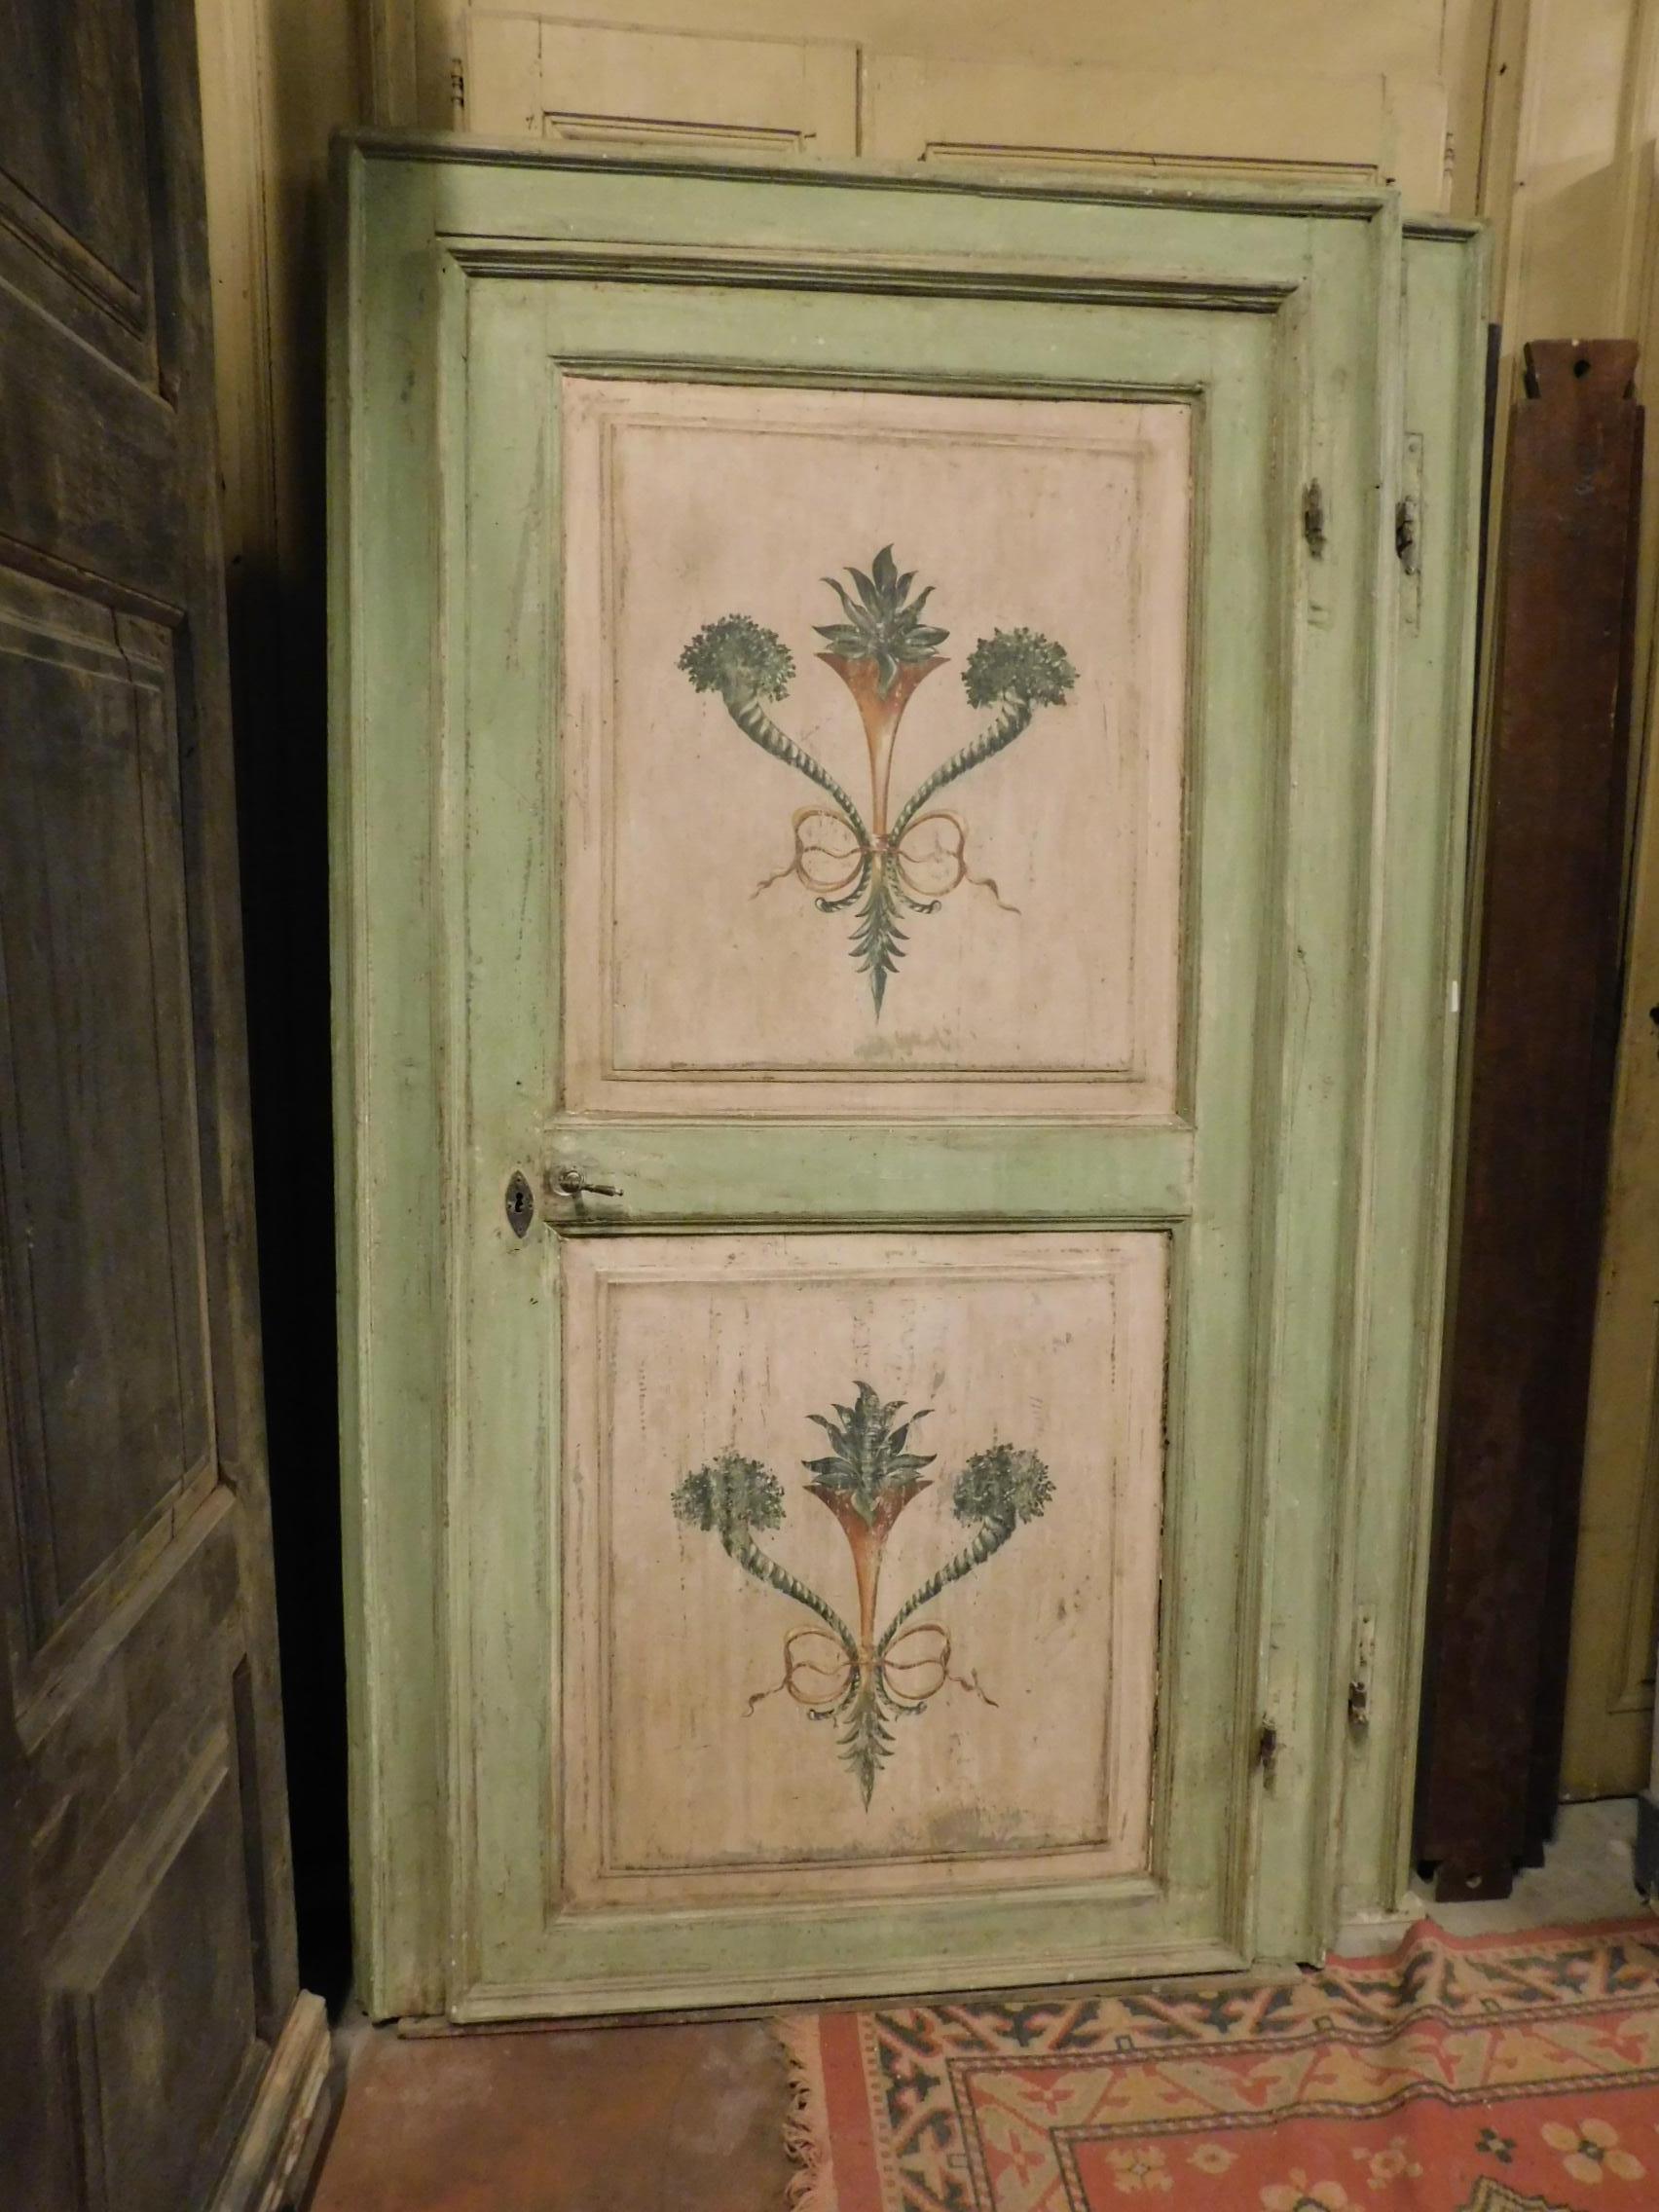 Pair of 18th century antique lacquered doors,
mis. max with frame h cm 210 x 120, door size cm 96 x 200 back painted as front, come from central Italy, soft and very romantic pastel colors, complete and restored doors with original details such as